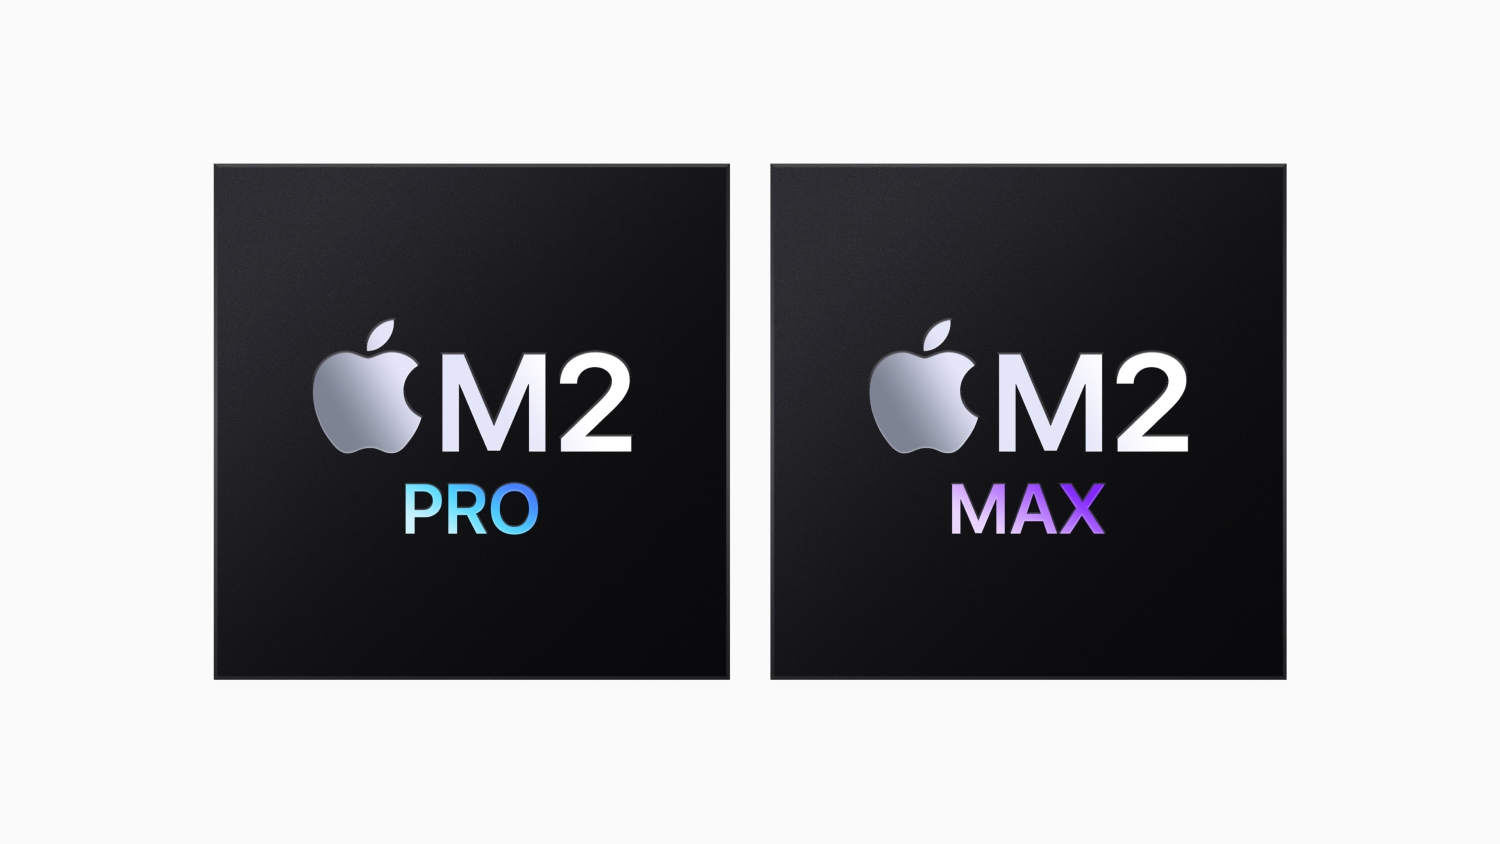 The Apple M2 Pro and M2 Max chips next to each other.